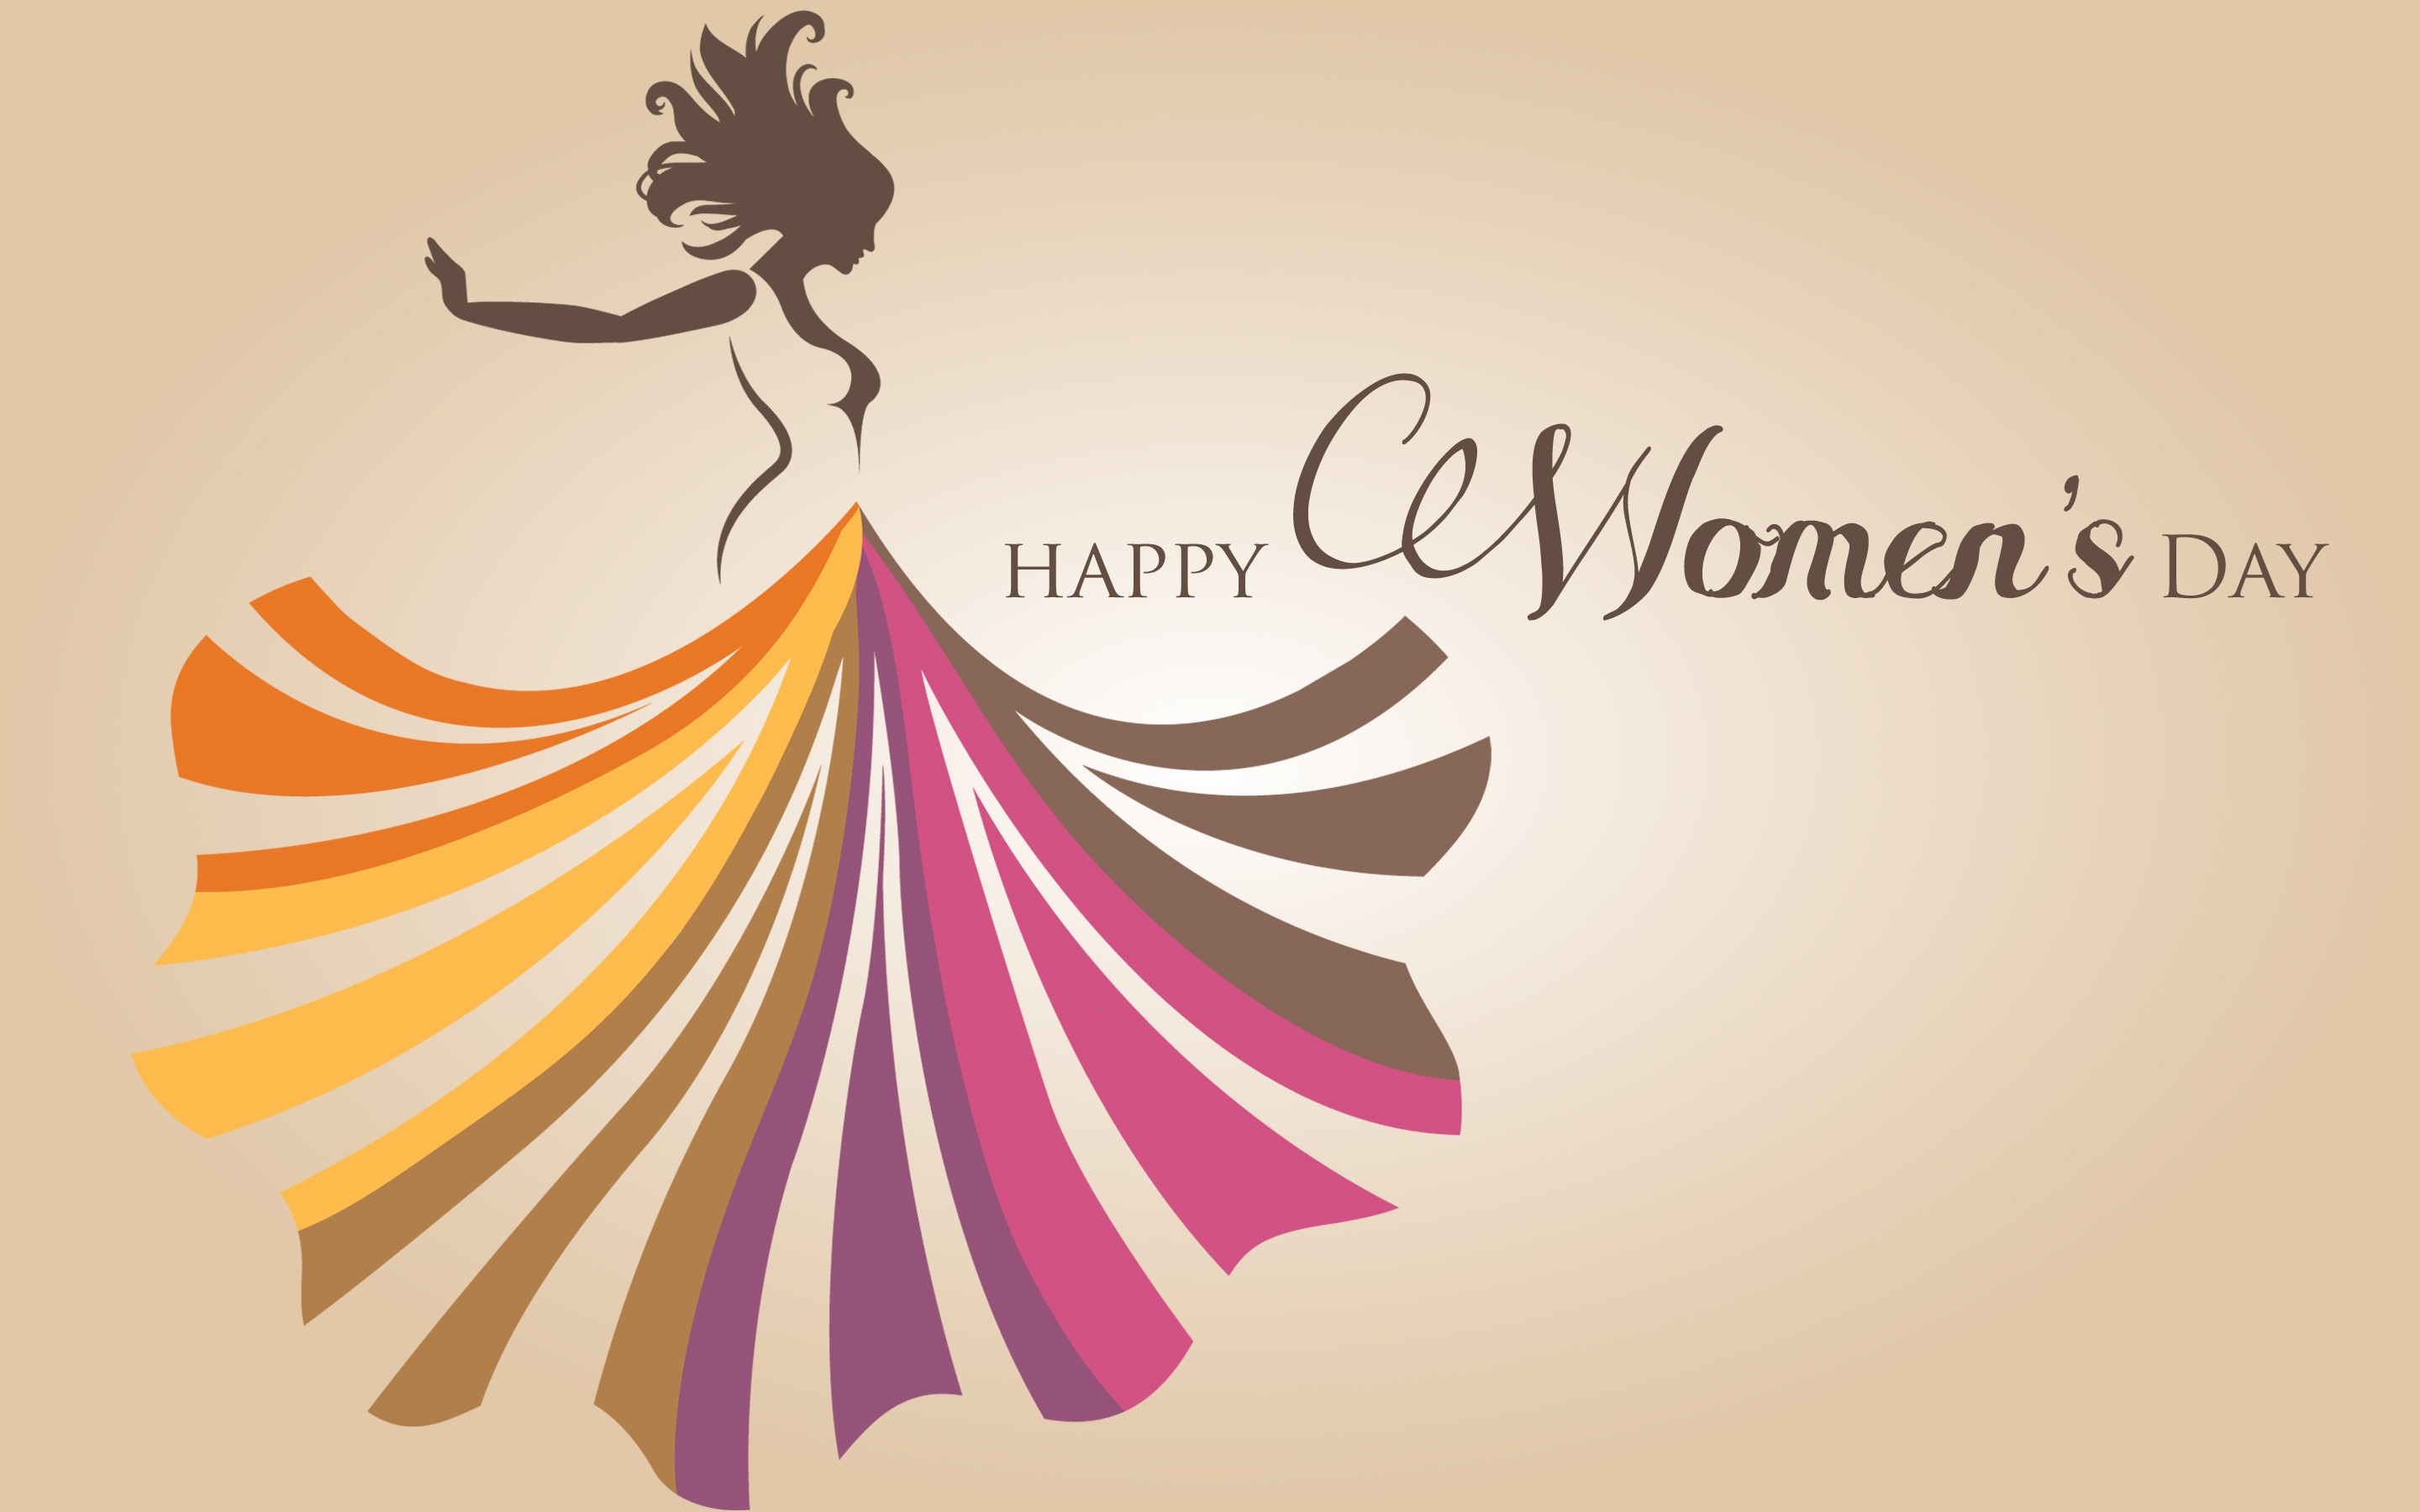 Happy Women's Day 2016 Images wallpapers (12)